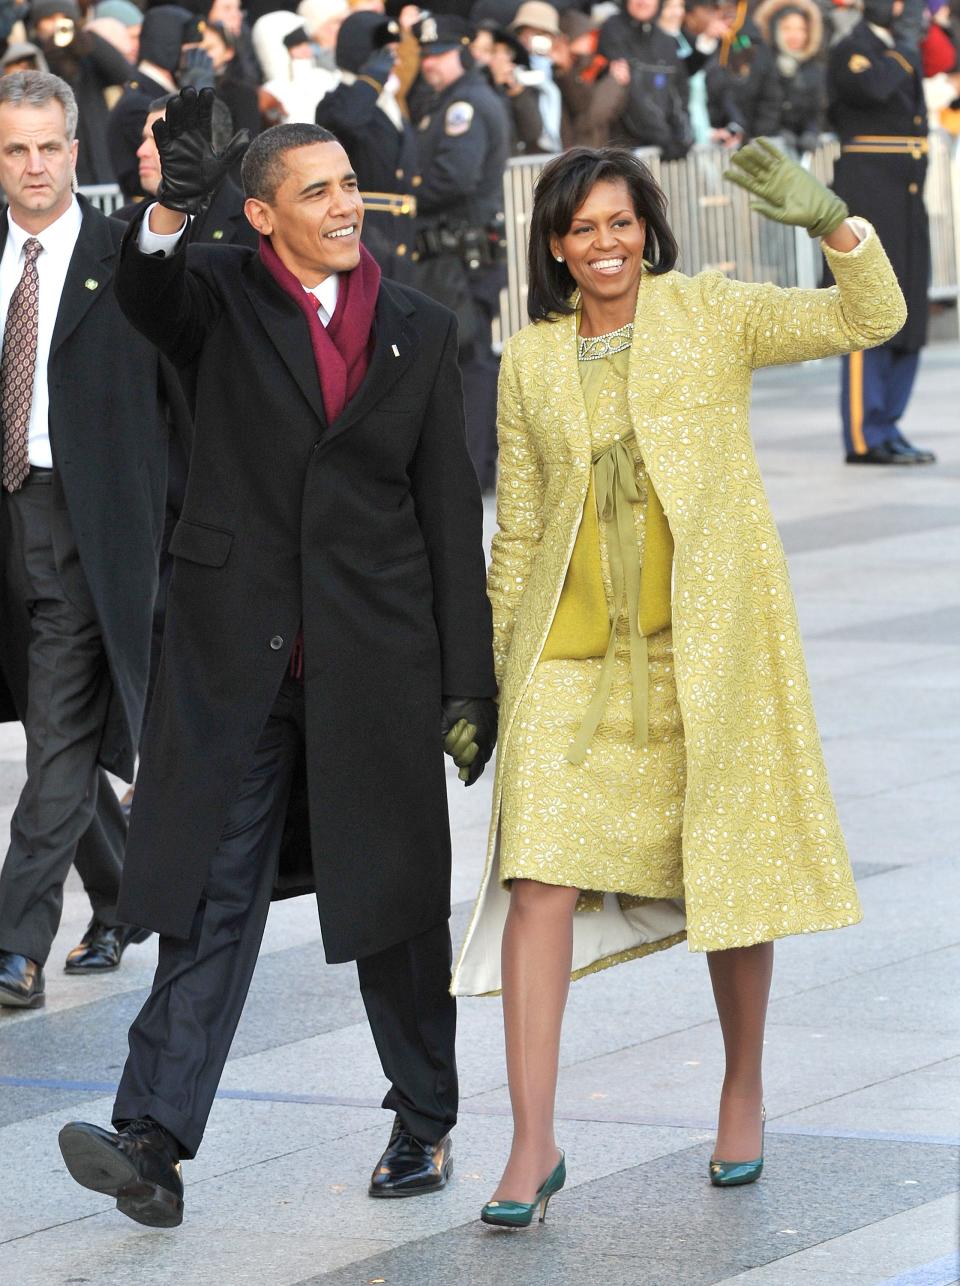 Barack and Michelle in a yellow-green coat, blouse, skirt, and gloves.